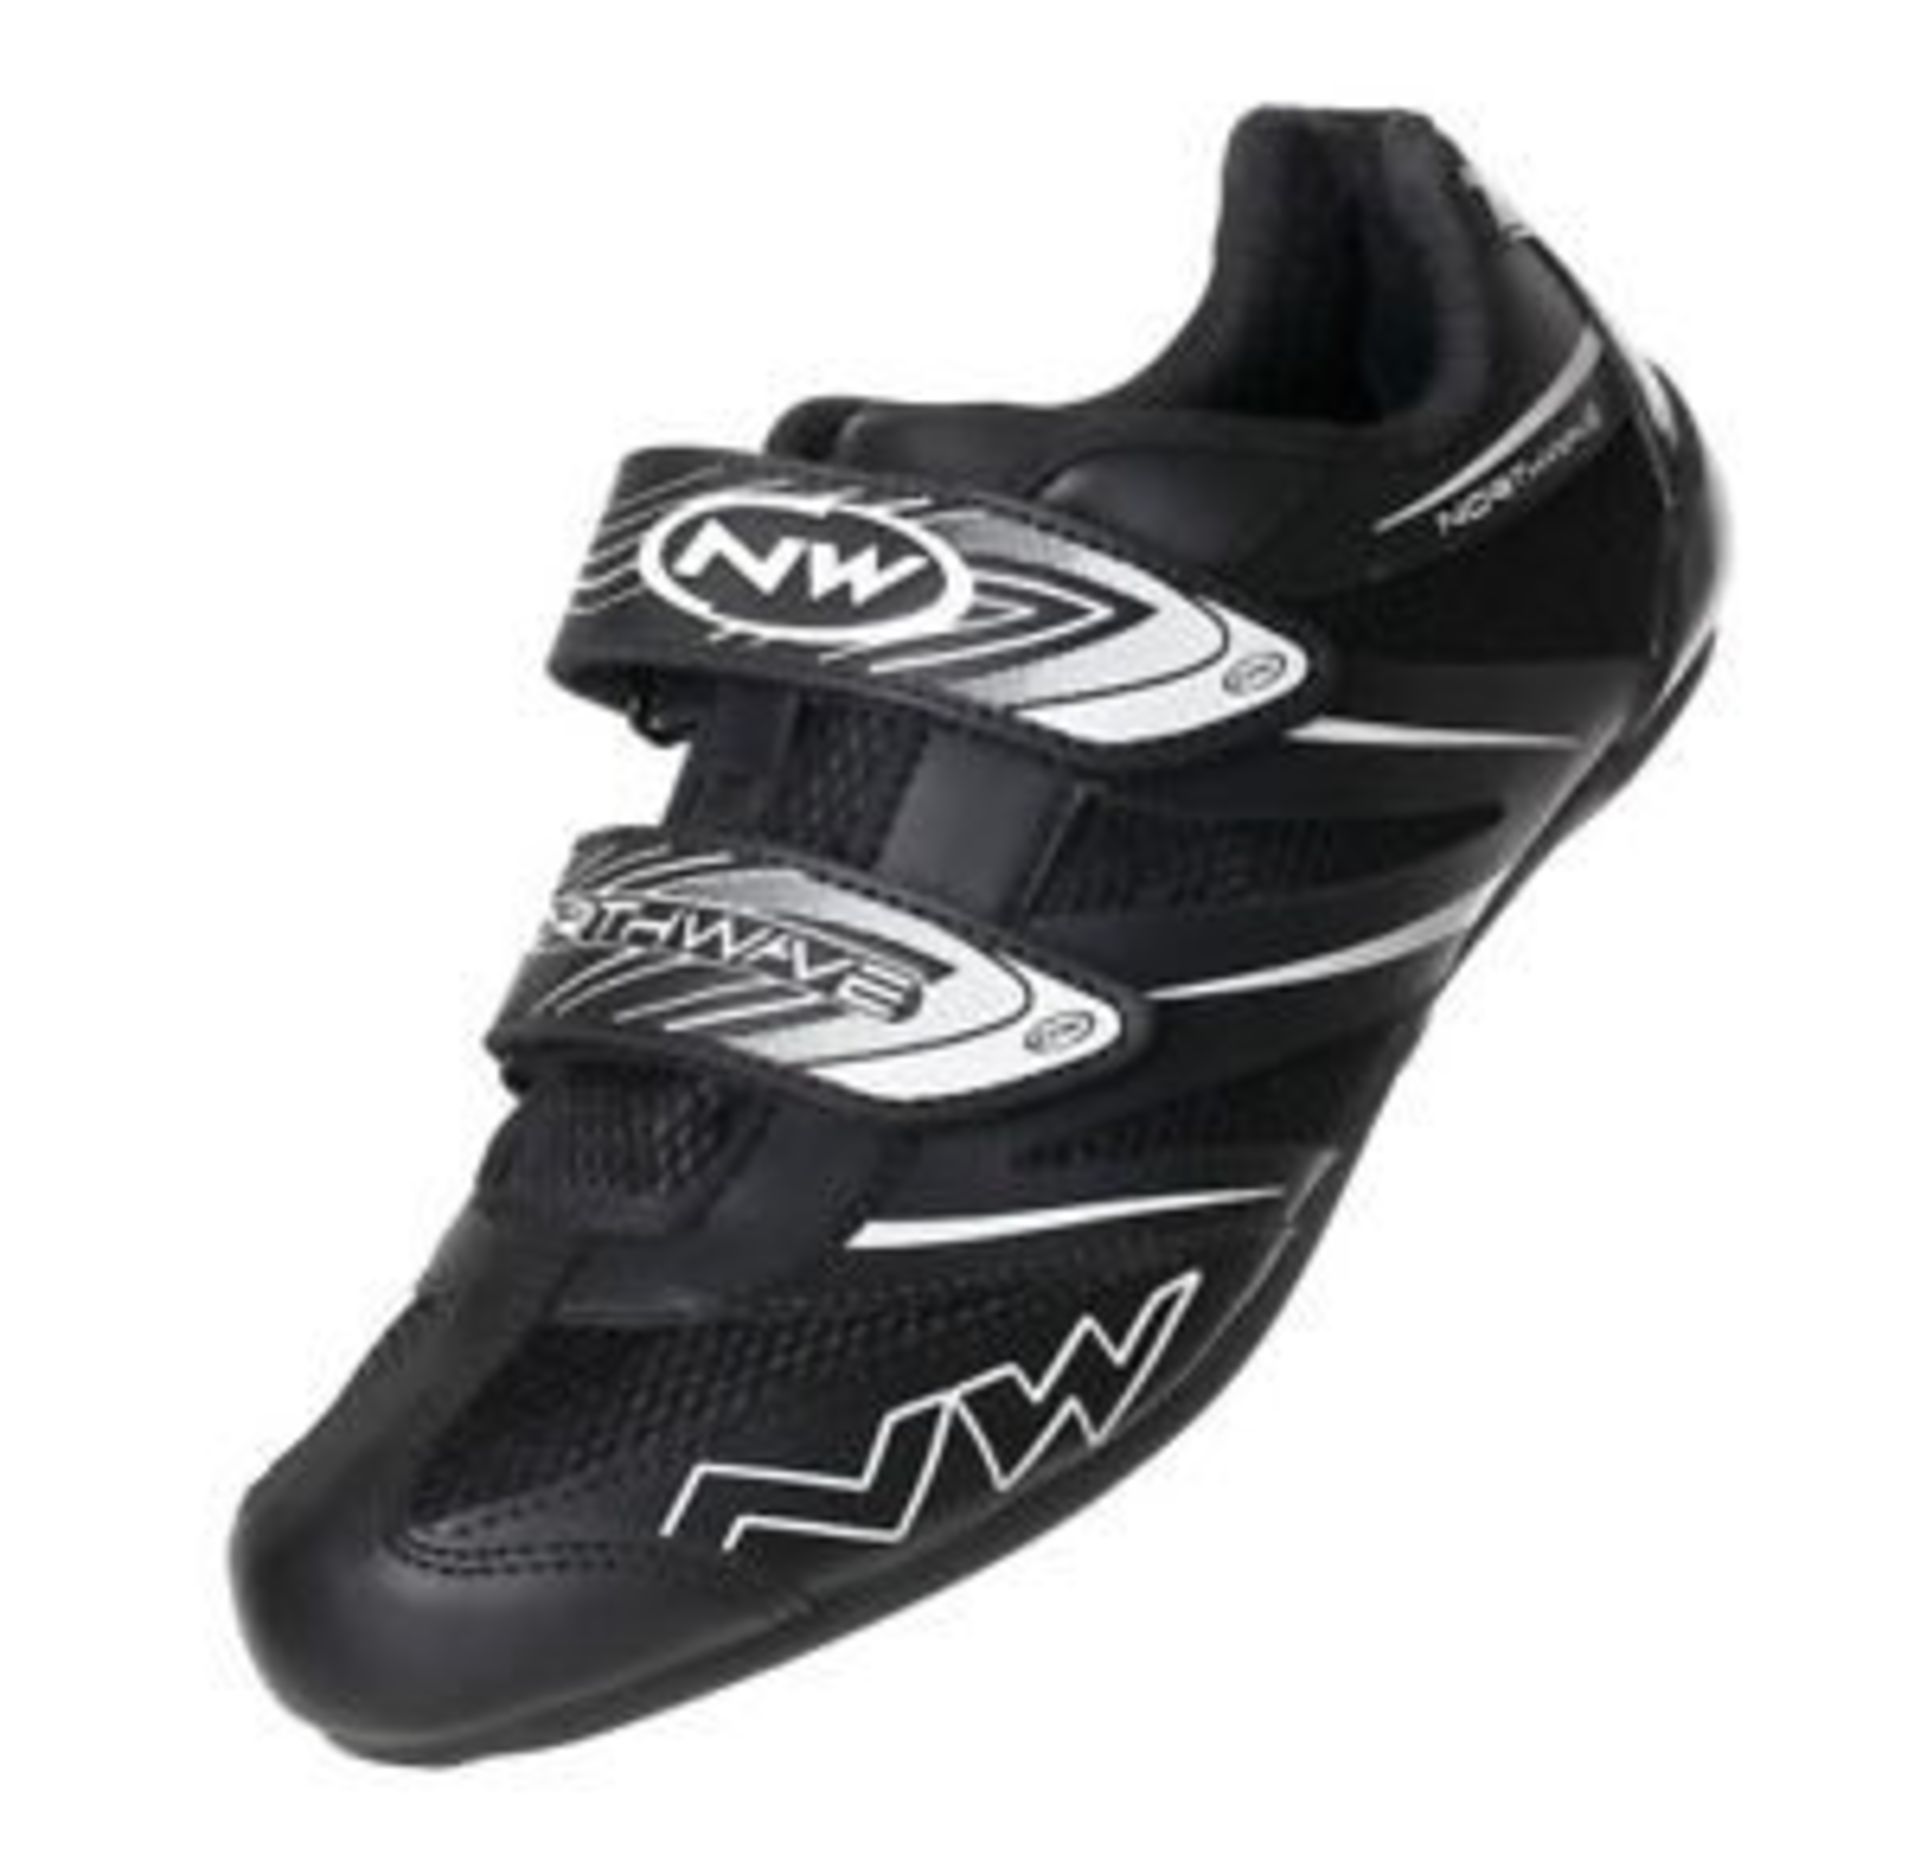 NorthWave Jet Pro Black Cycling Shoes UK6 RRP £69.99